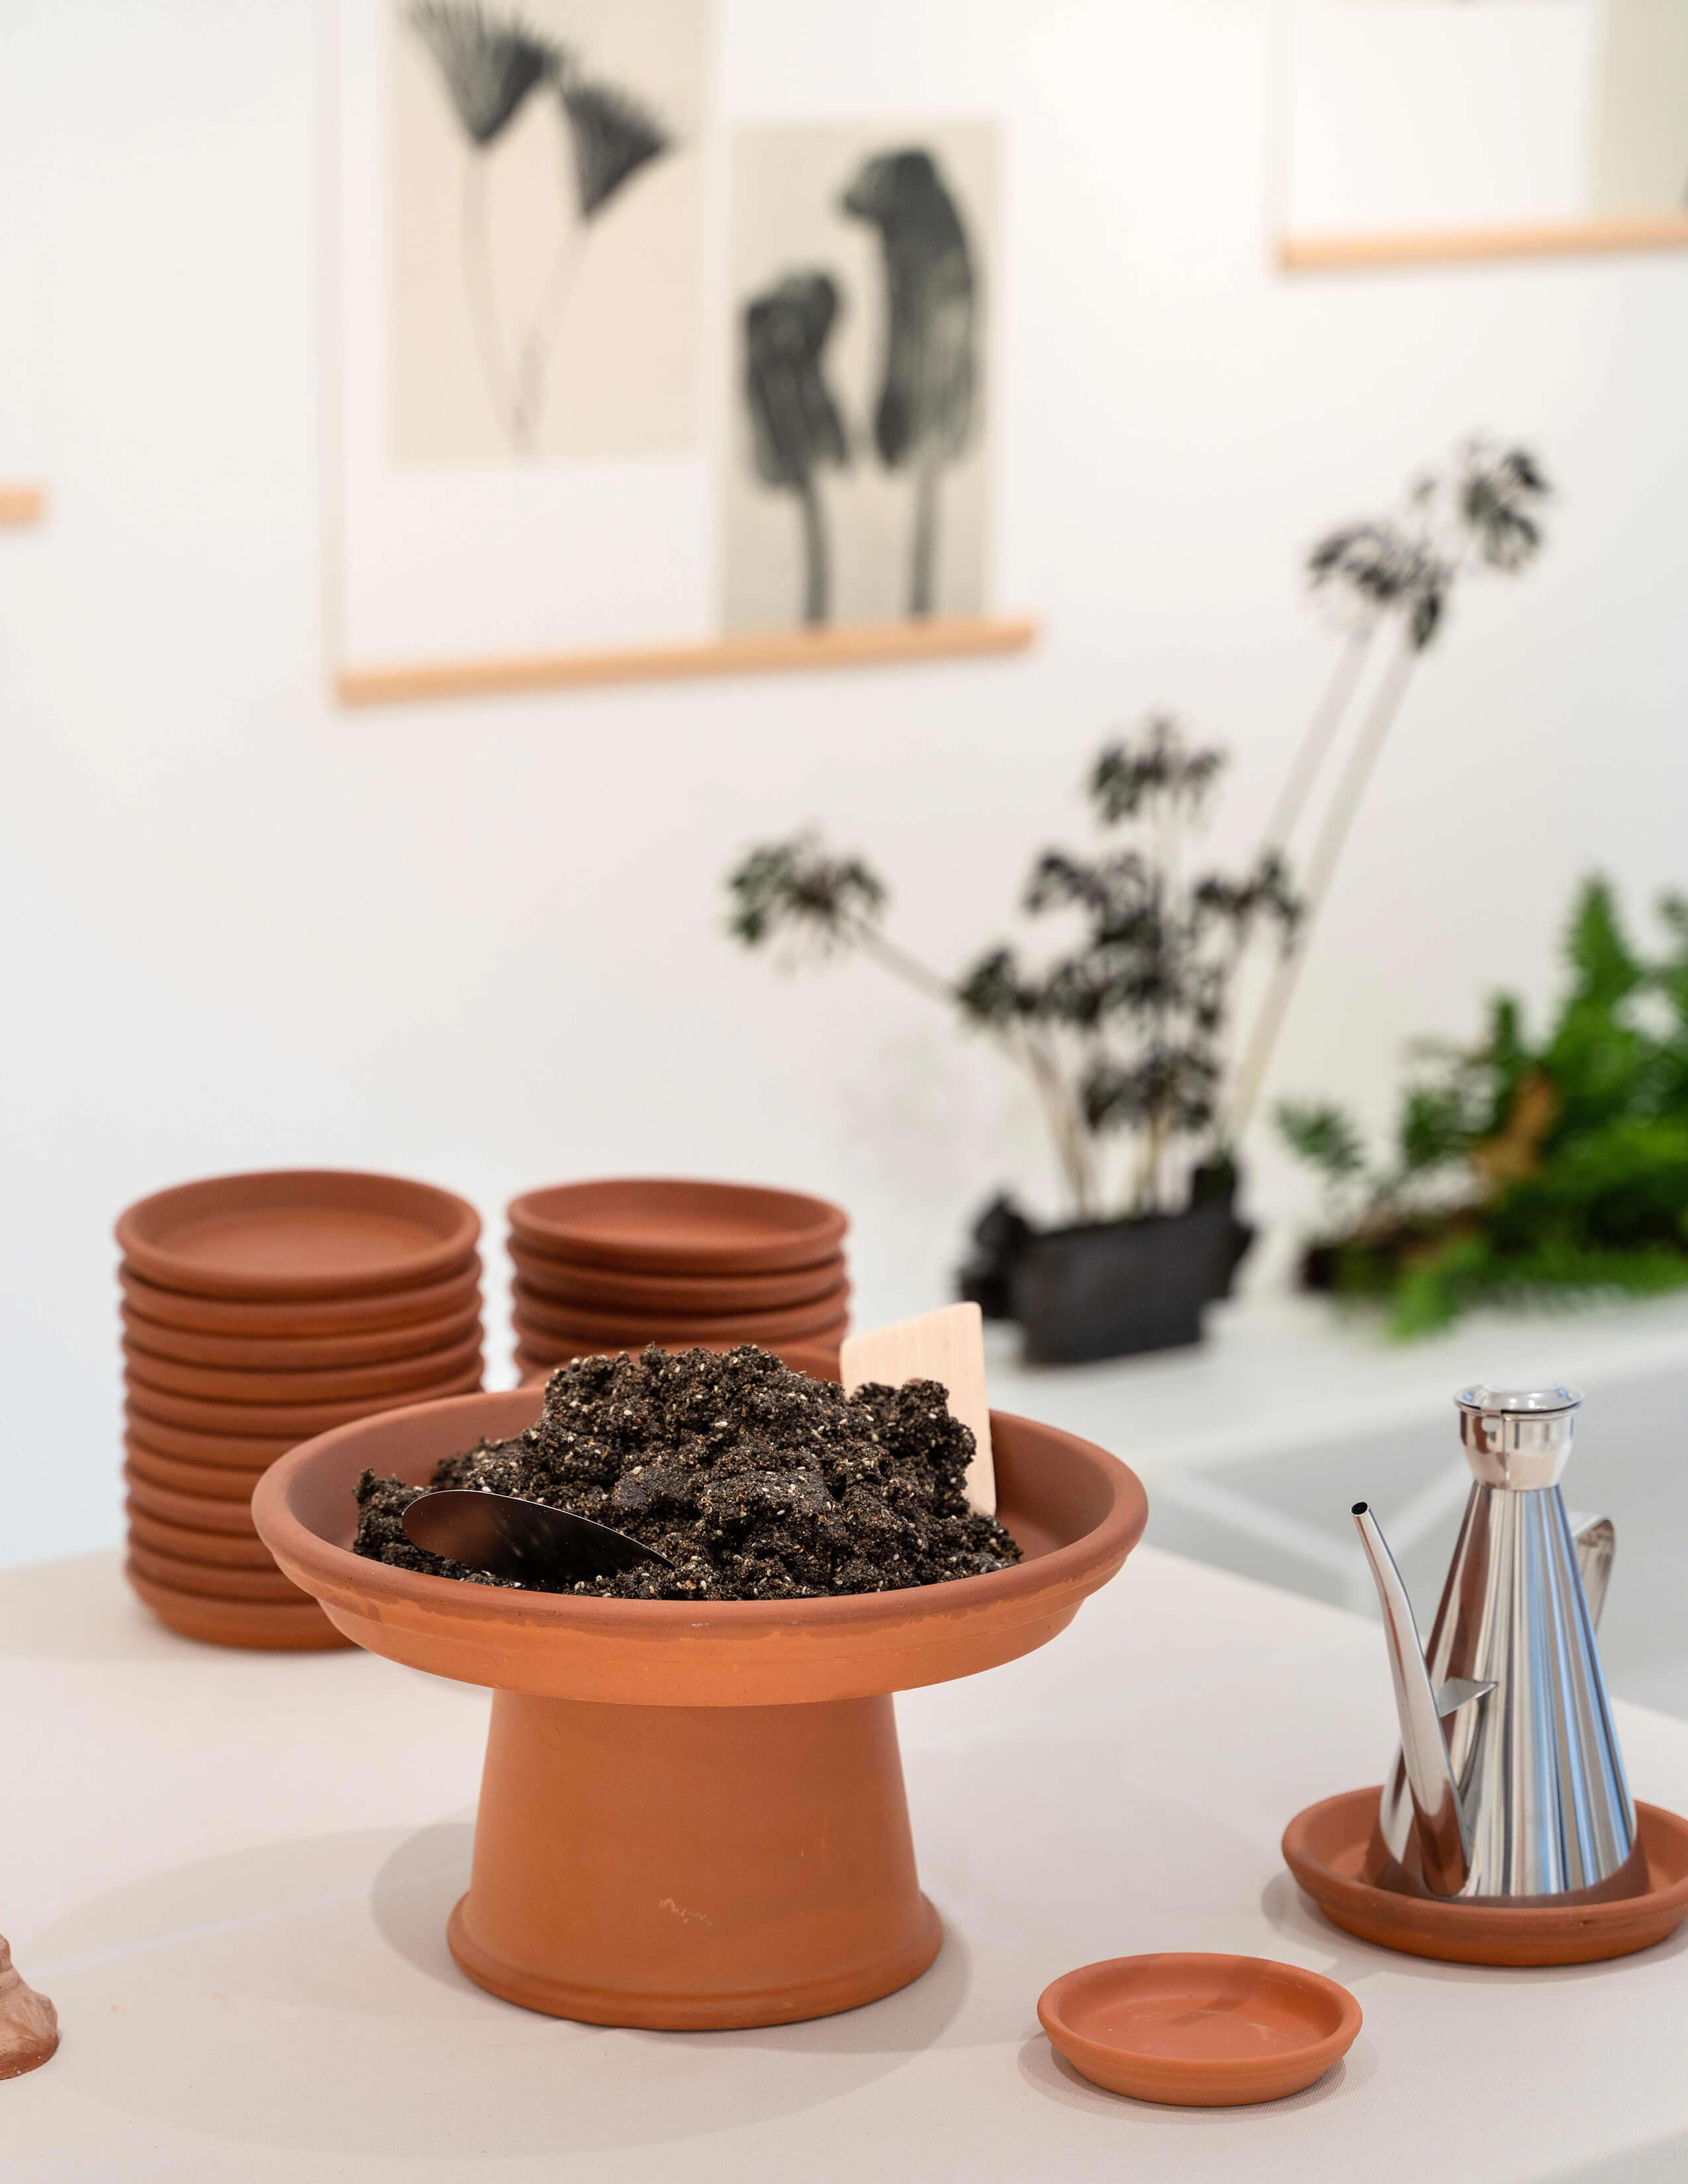 A plate of soil is presented next to a pile of small plates and a stainless steel oil pot.